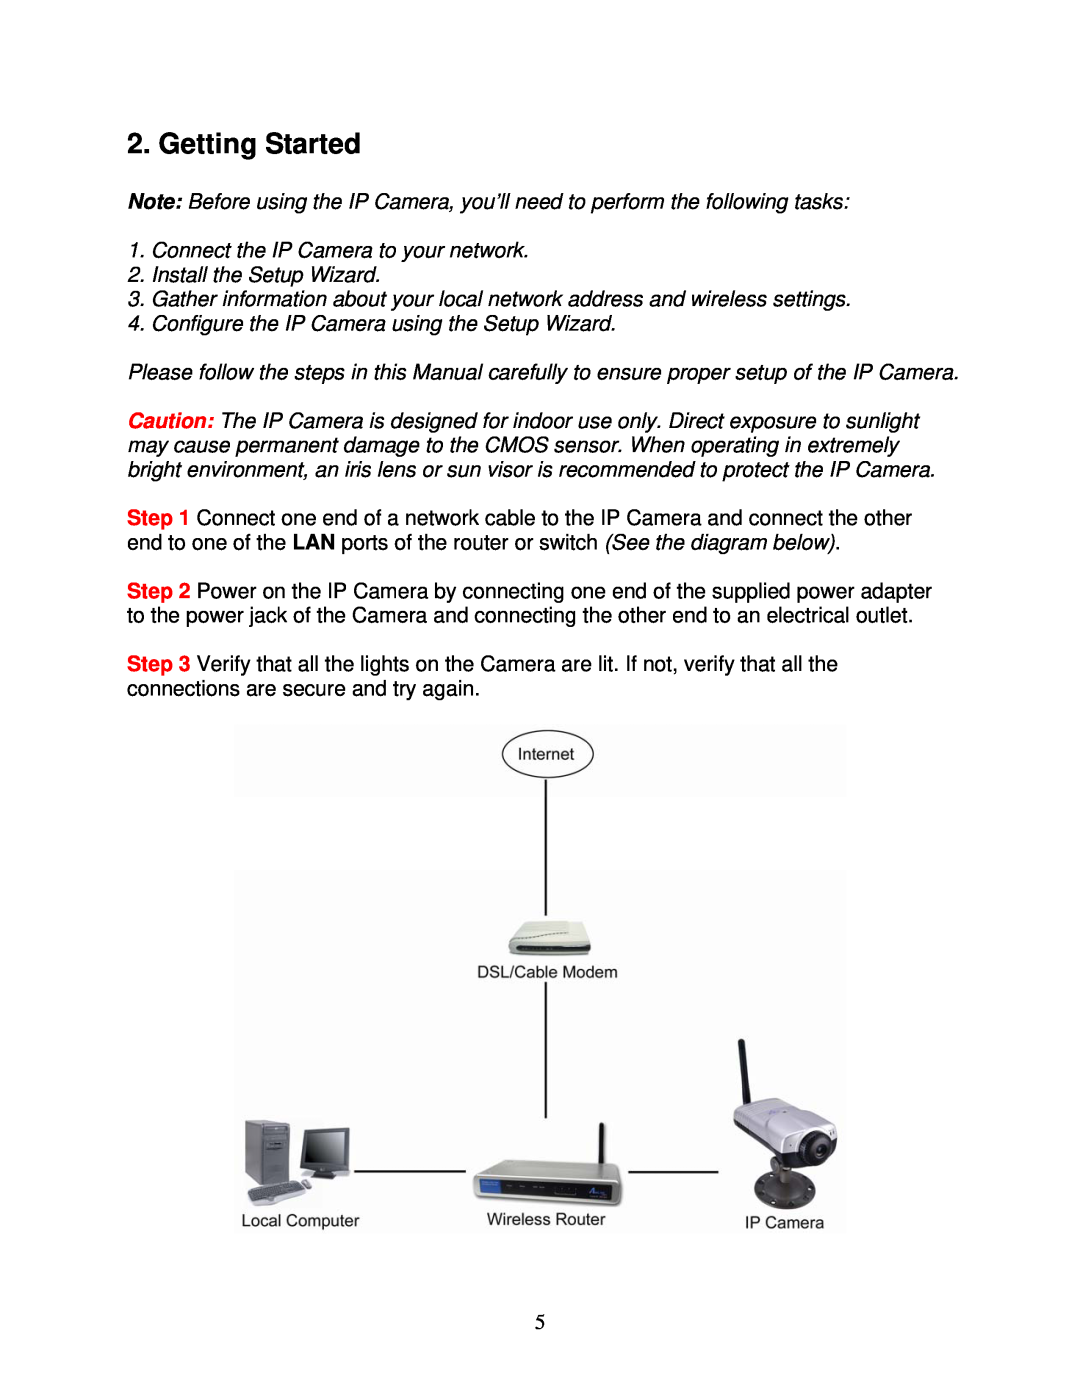 Airlink101 AIC250W user manual Getting Started, Connect the IP Camera to your network 2. Install the Setup Wizard 